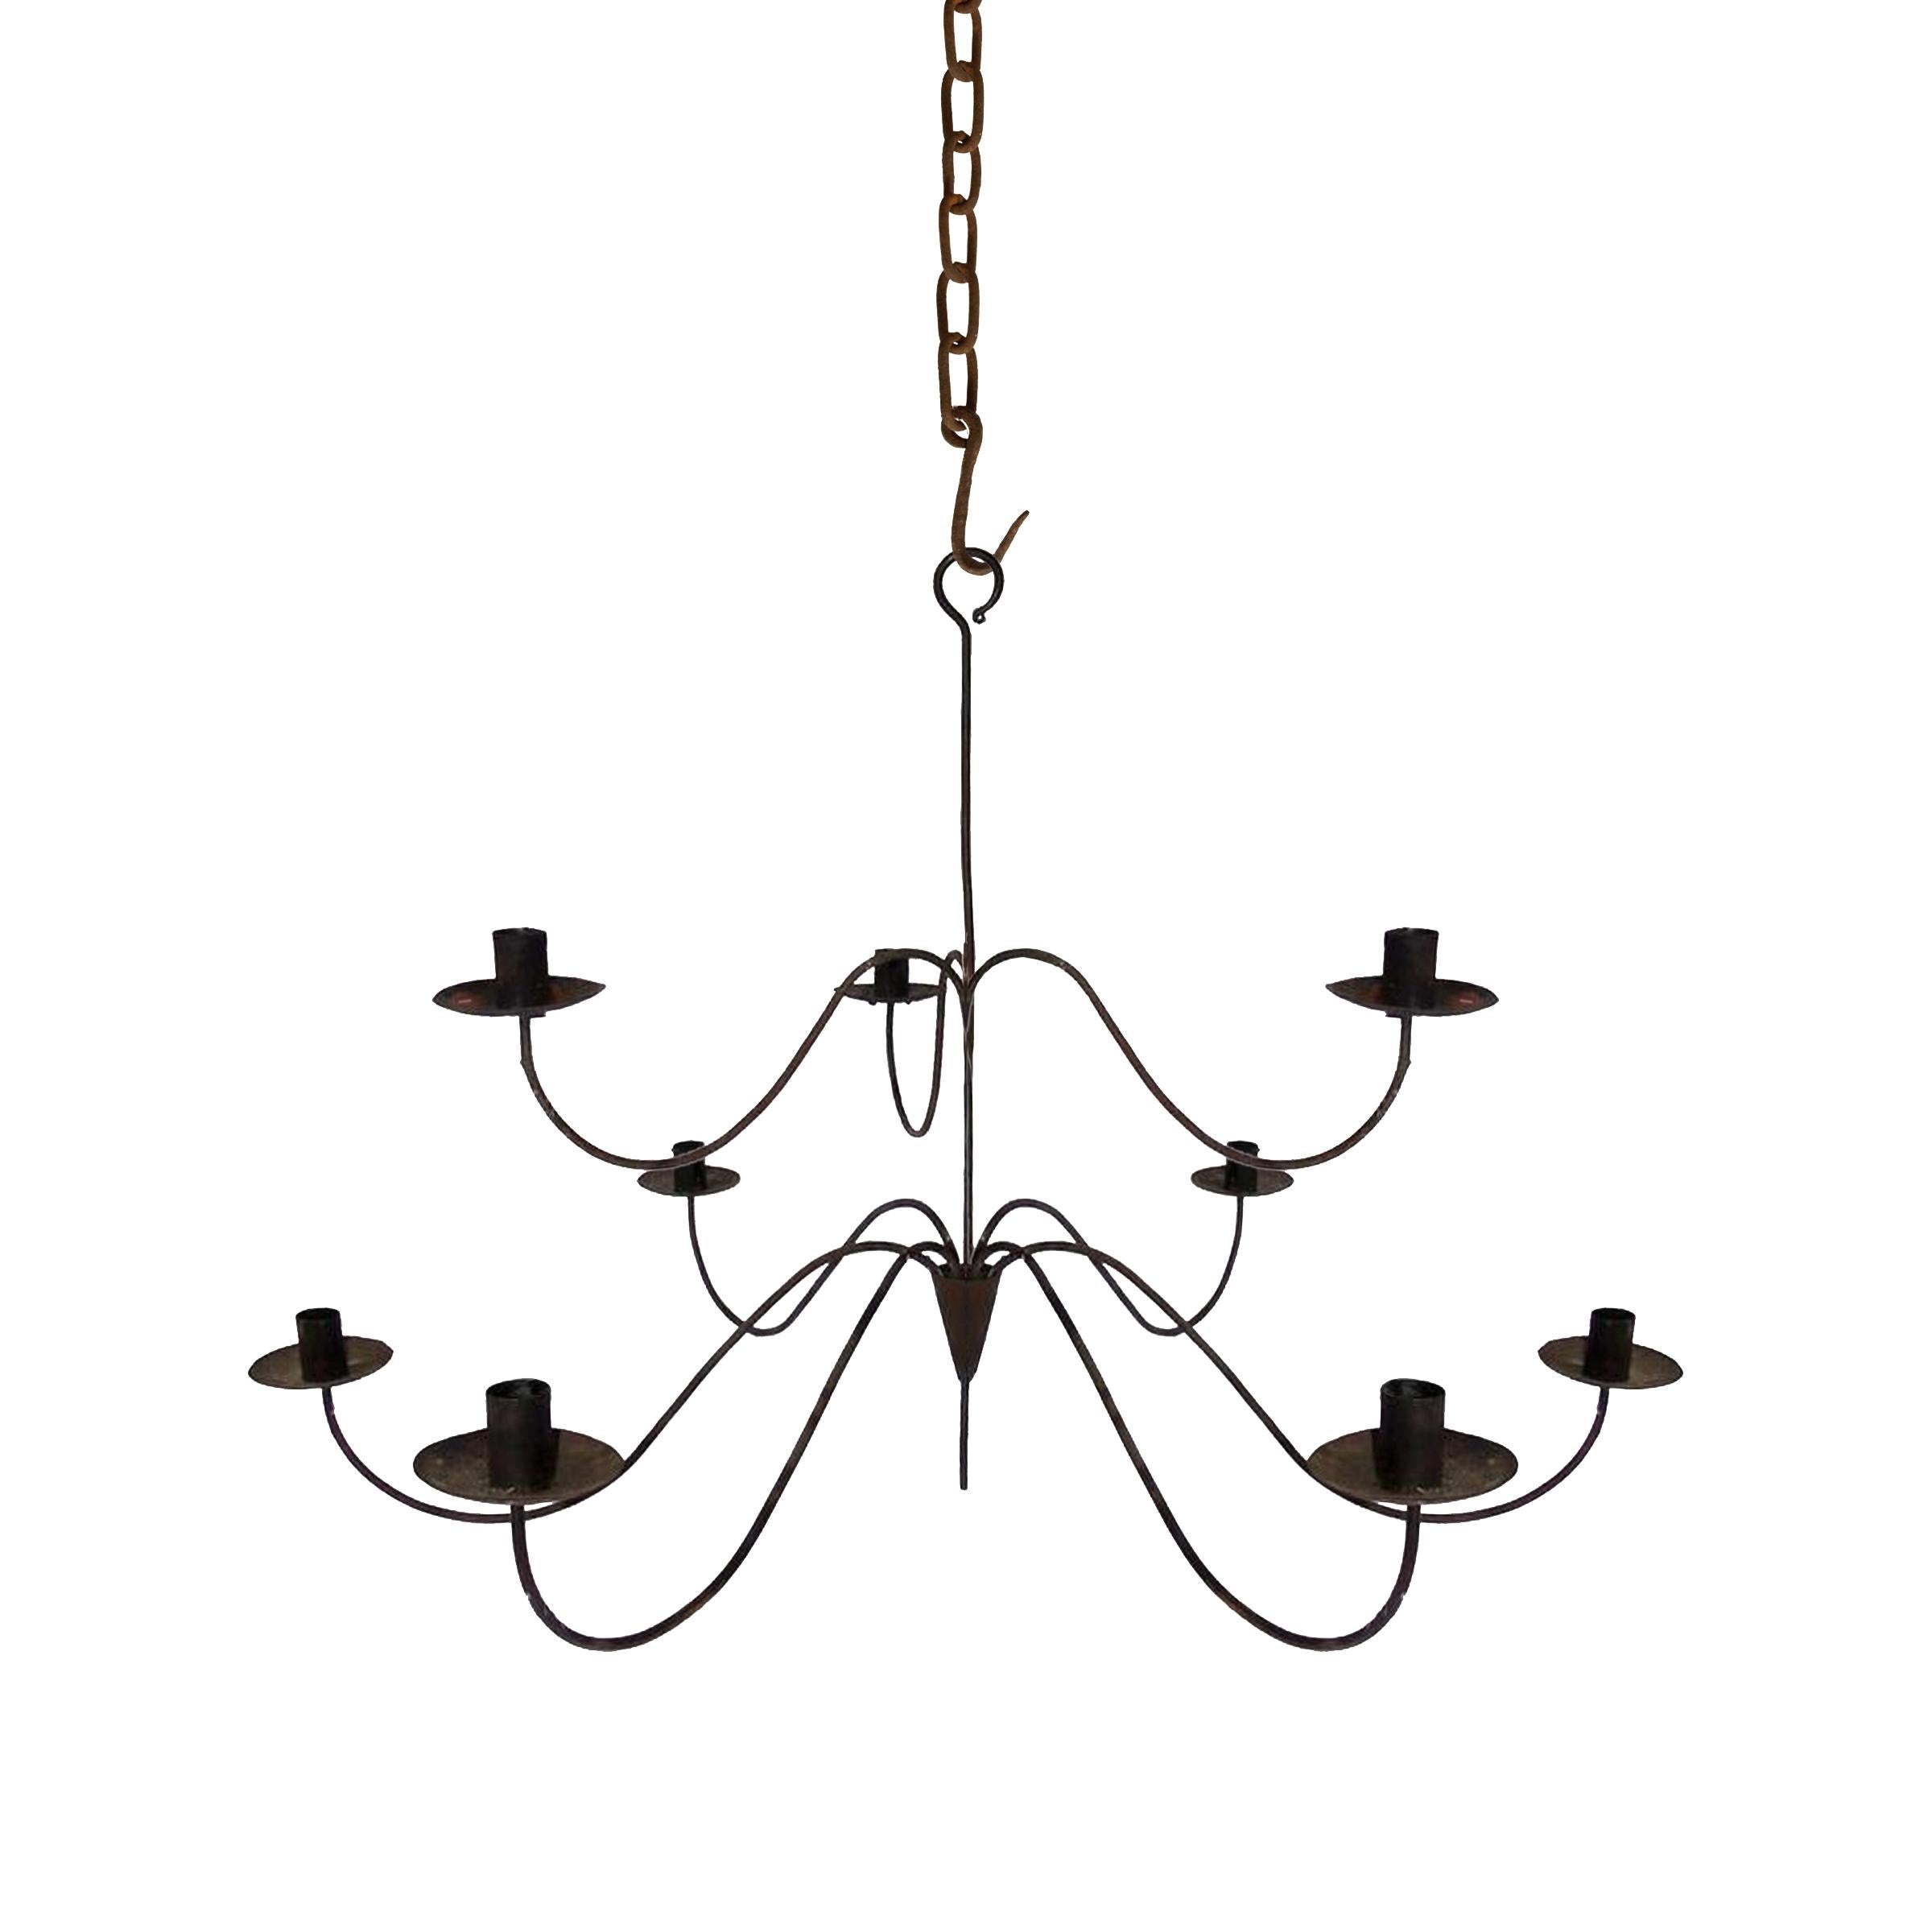 Hand-Crafted 19th Century American Nine-Arm Iron Chandelier